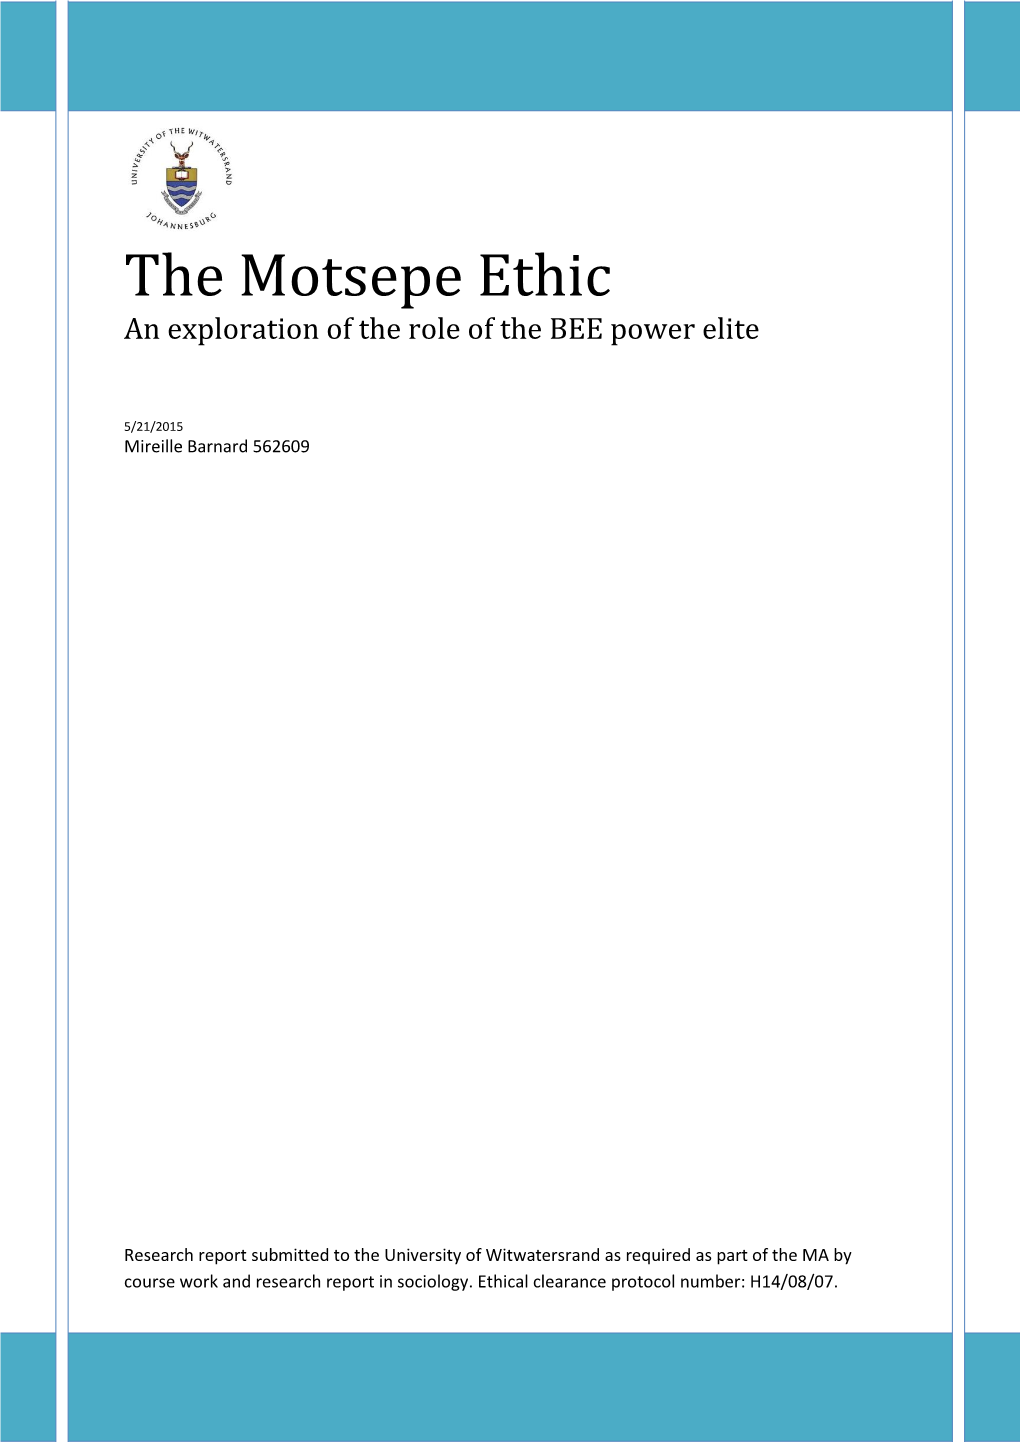 The Motsepe Ethic an Exploration of the Role of the BEE Power Elite